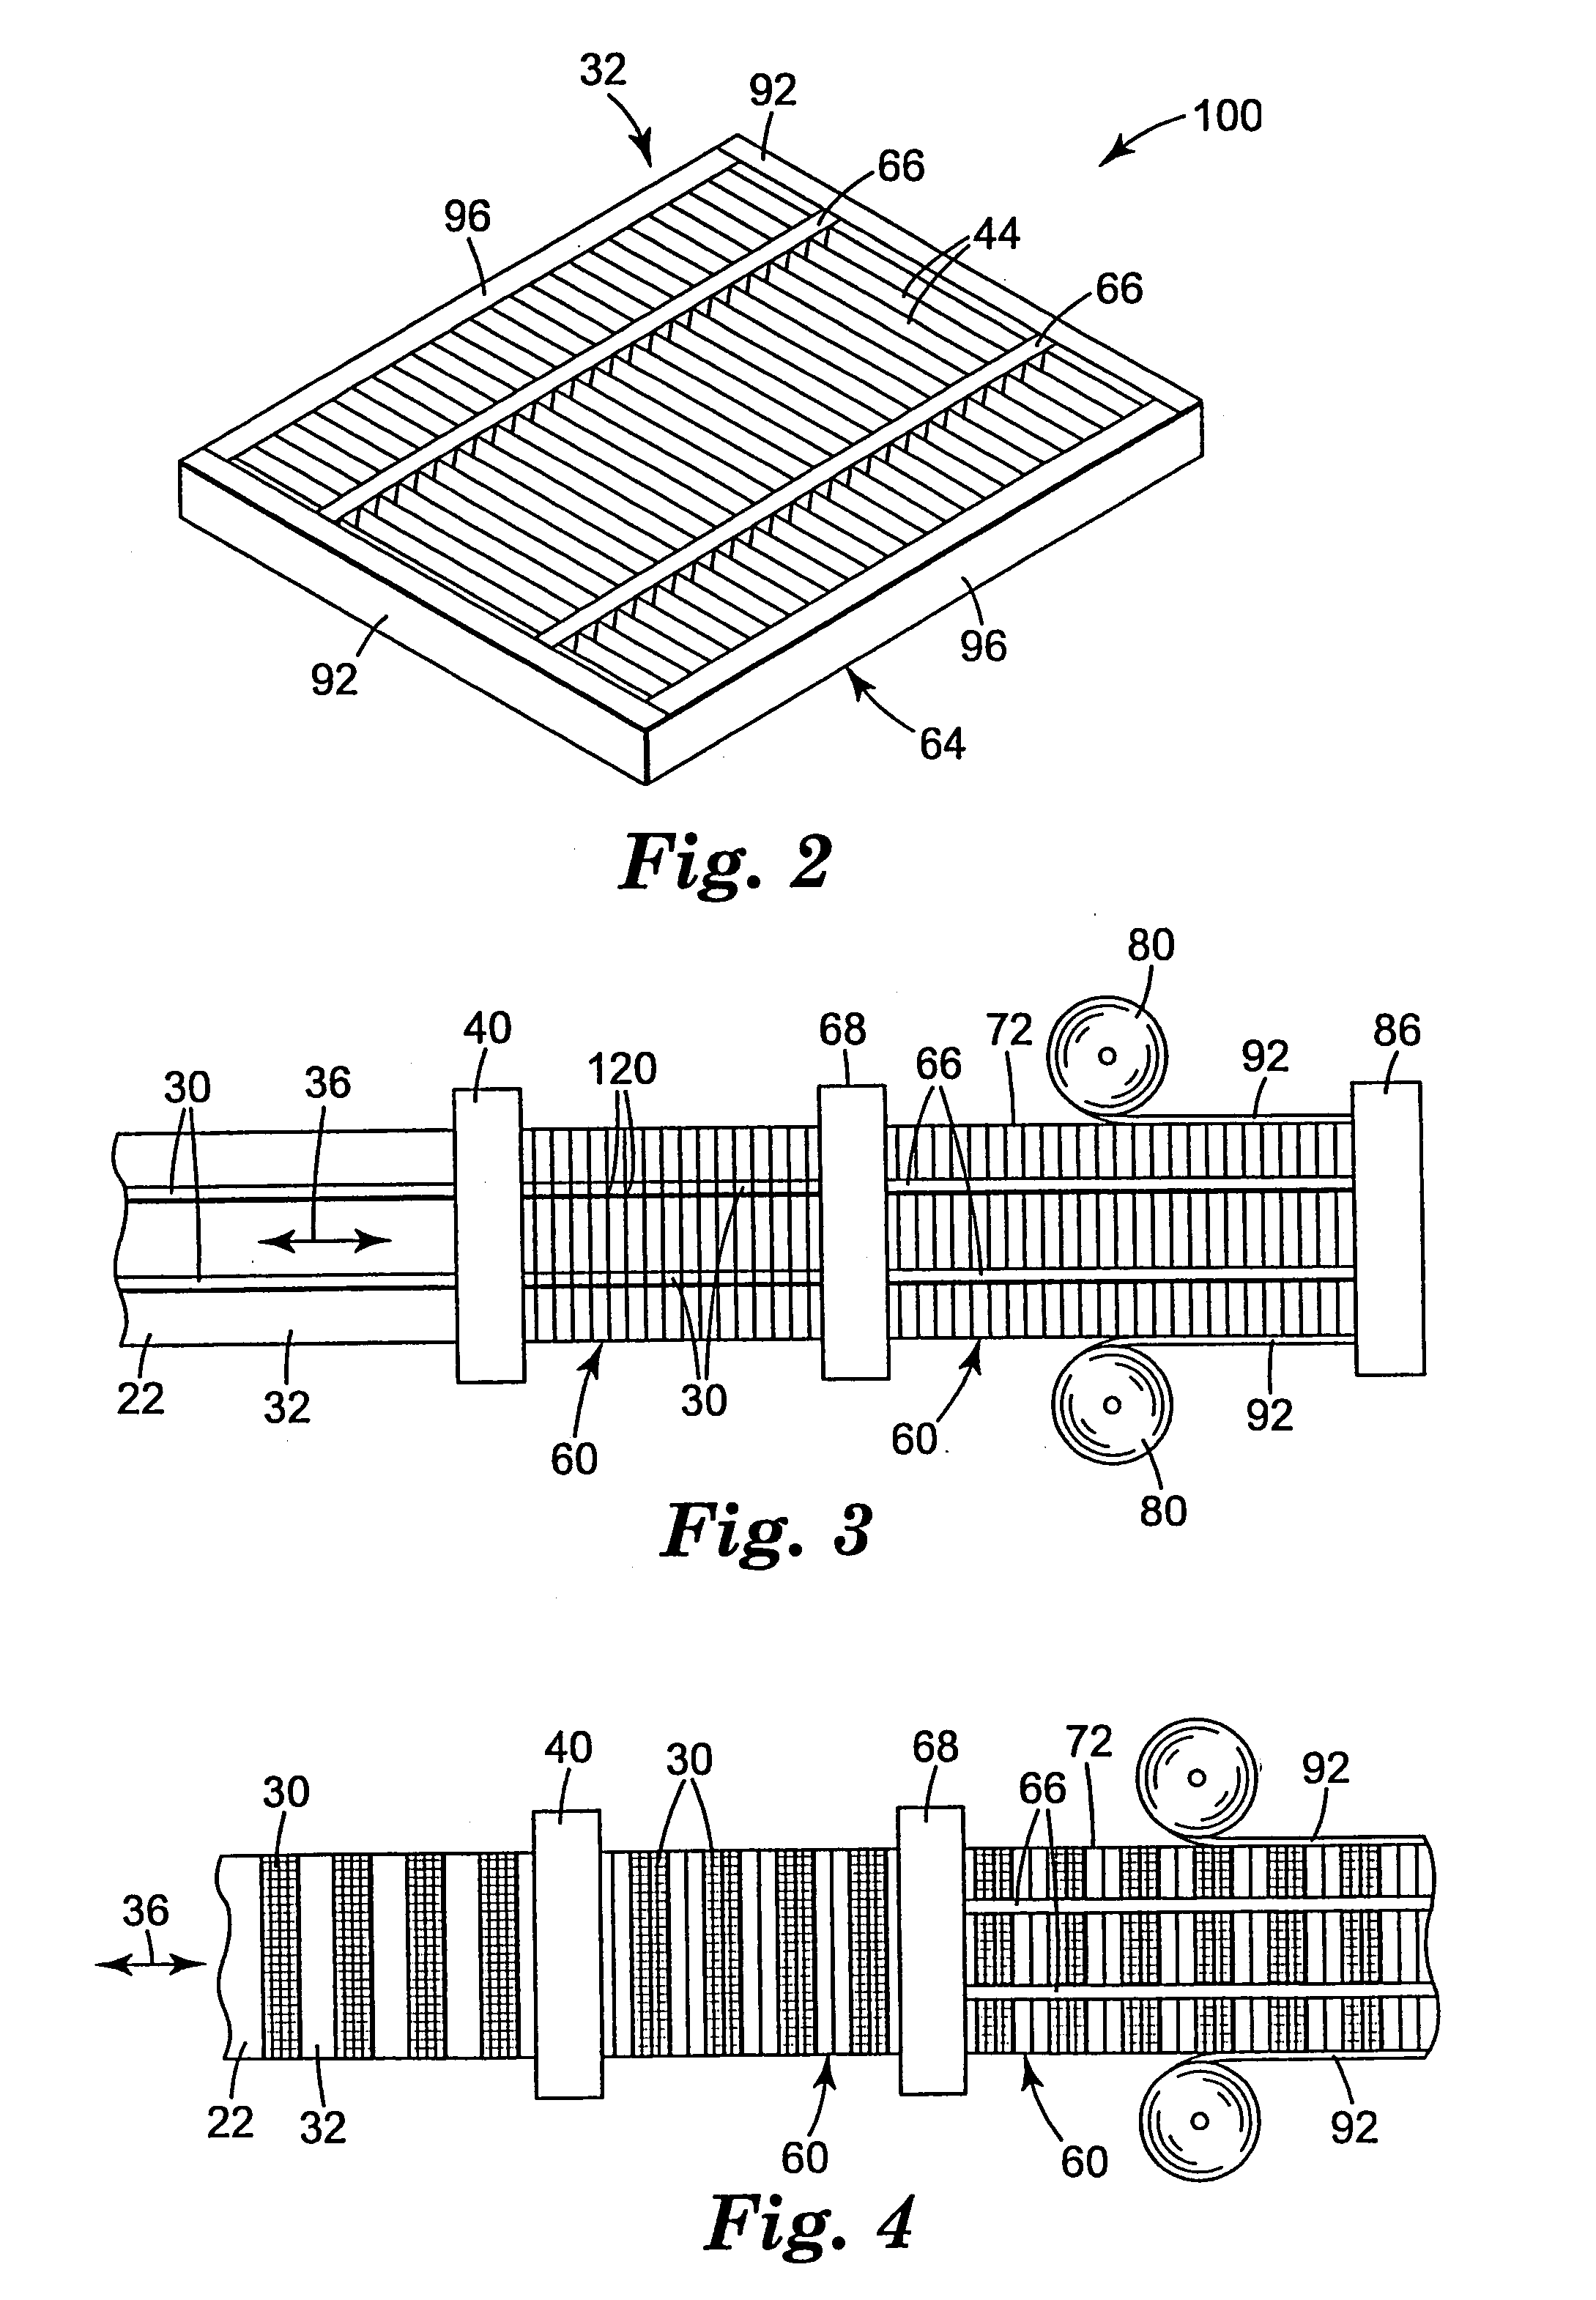 Self-supporting pleated filter and method of making same